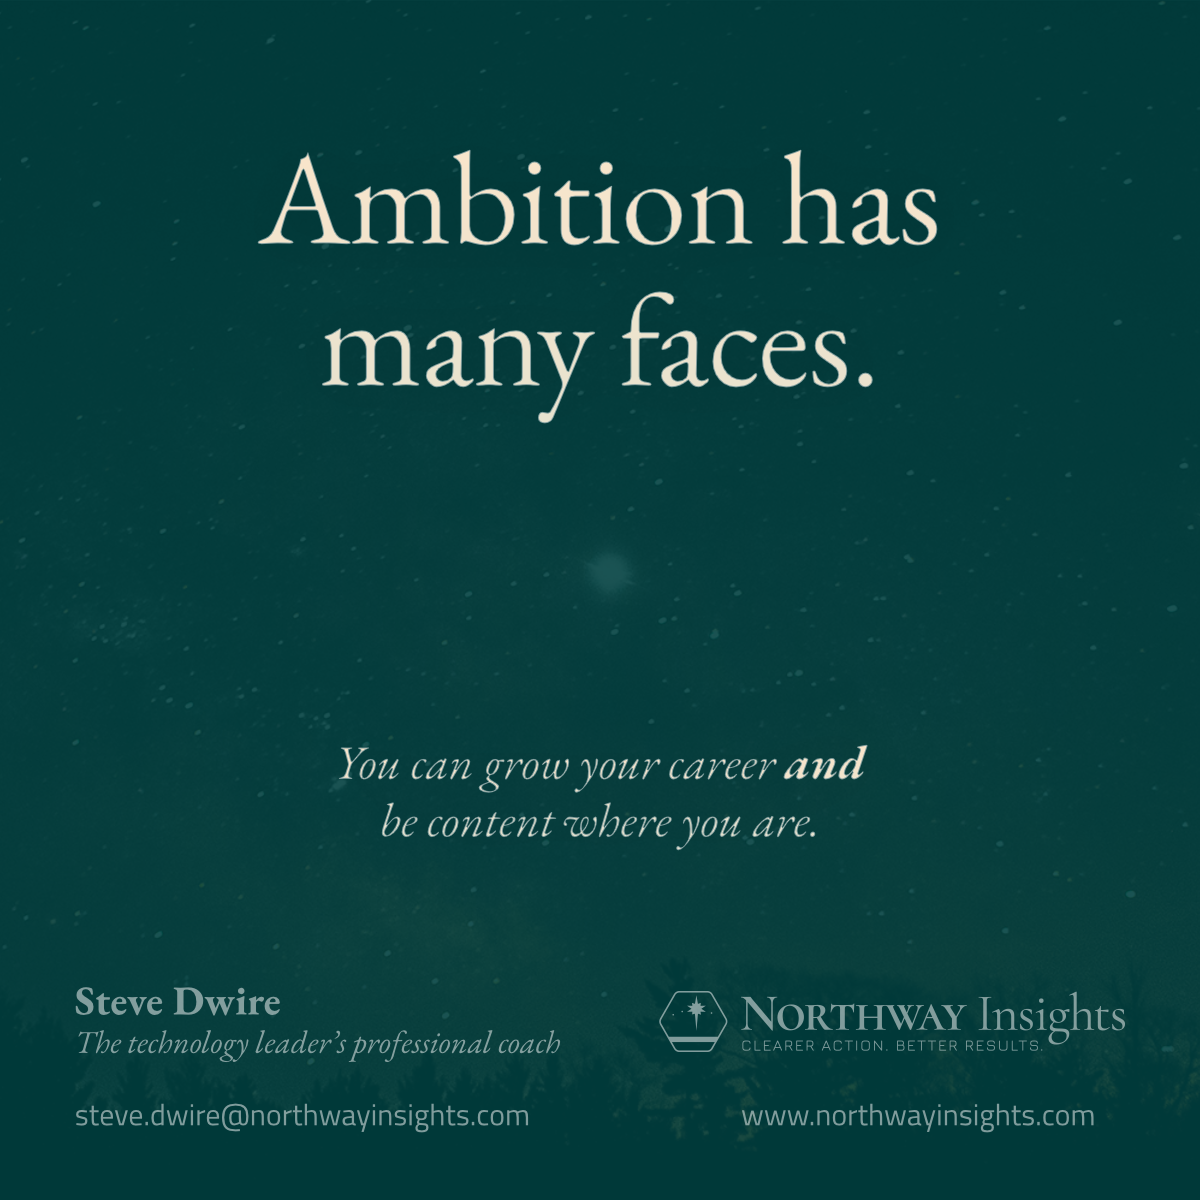 Ambition has many faces